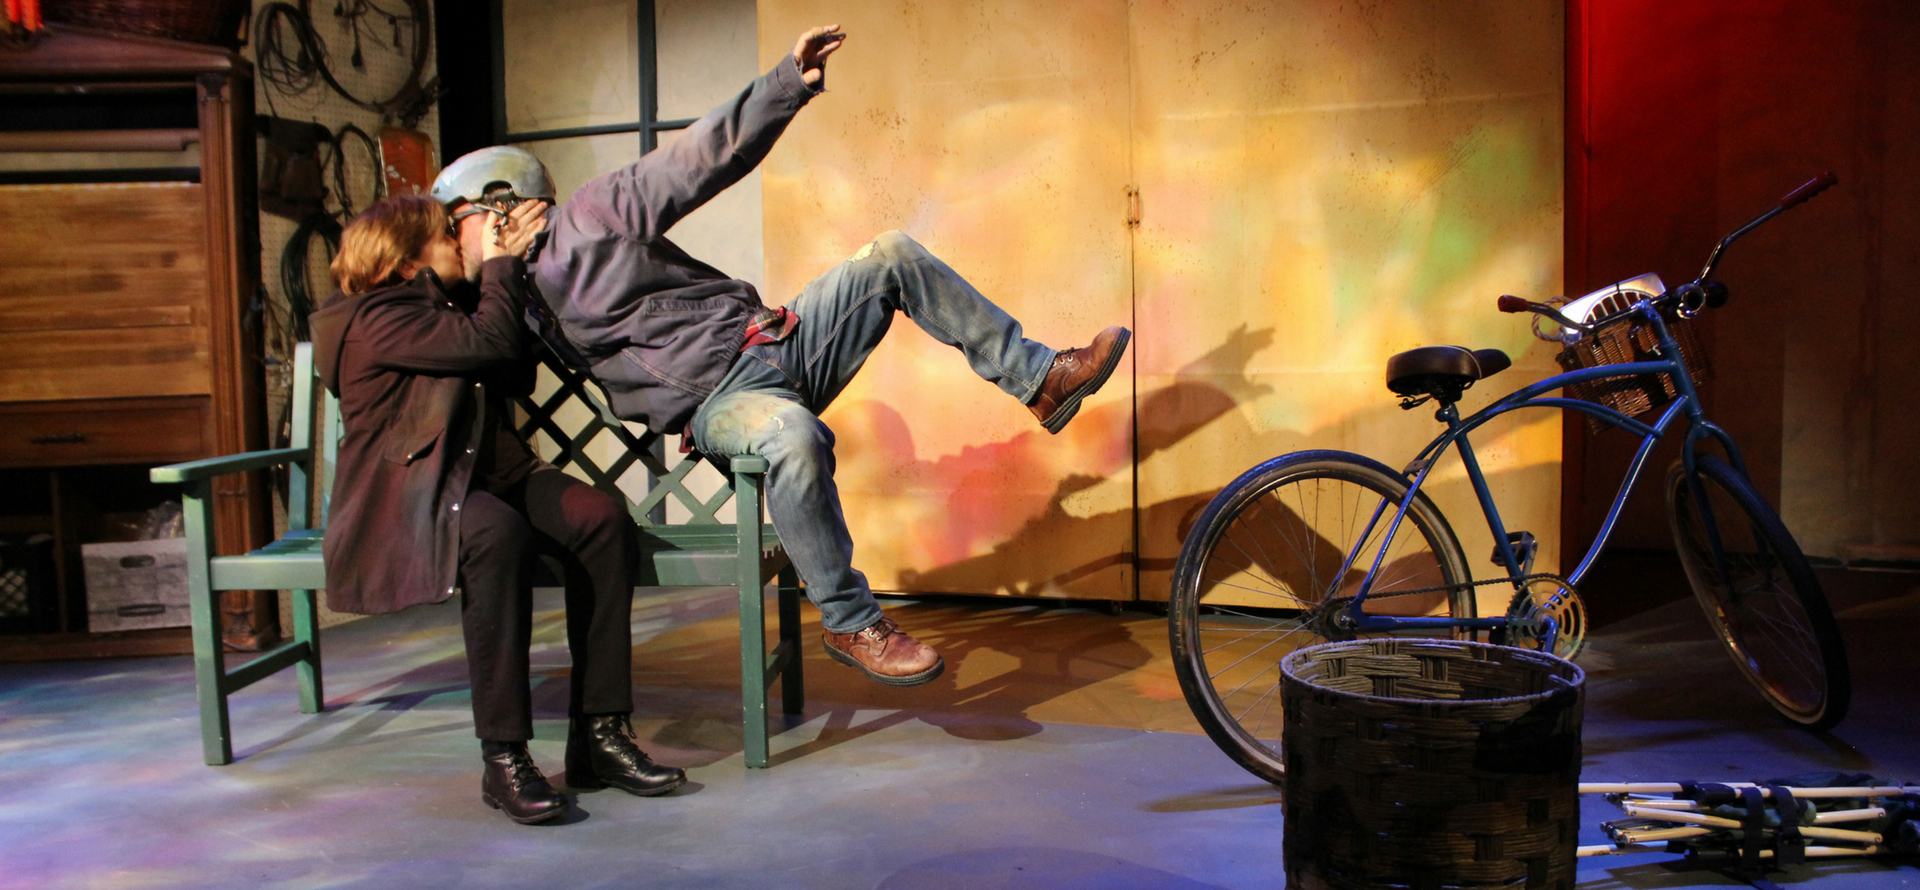 Man and woman on stage in play kissing; the man had just fallen off of a bike that is in the background